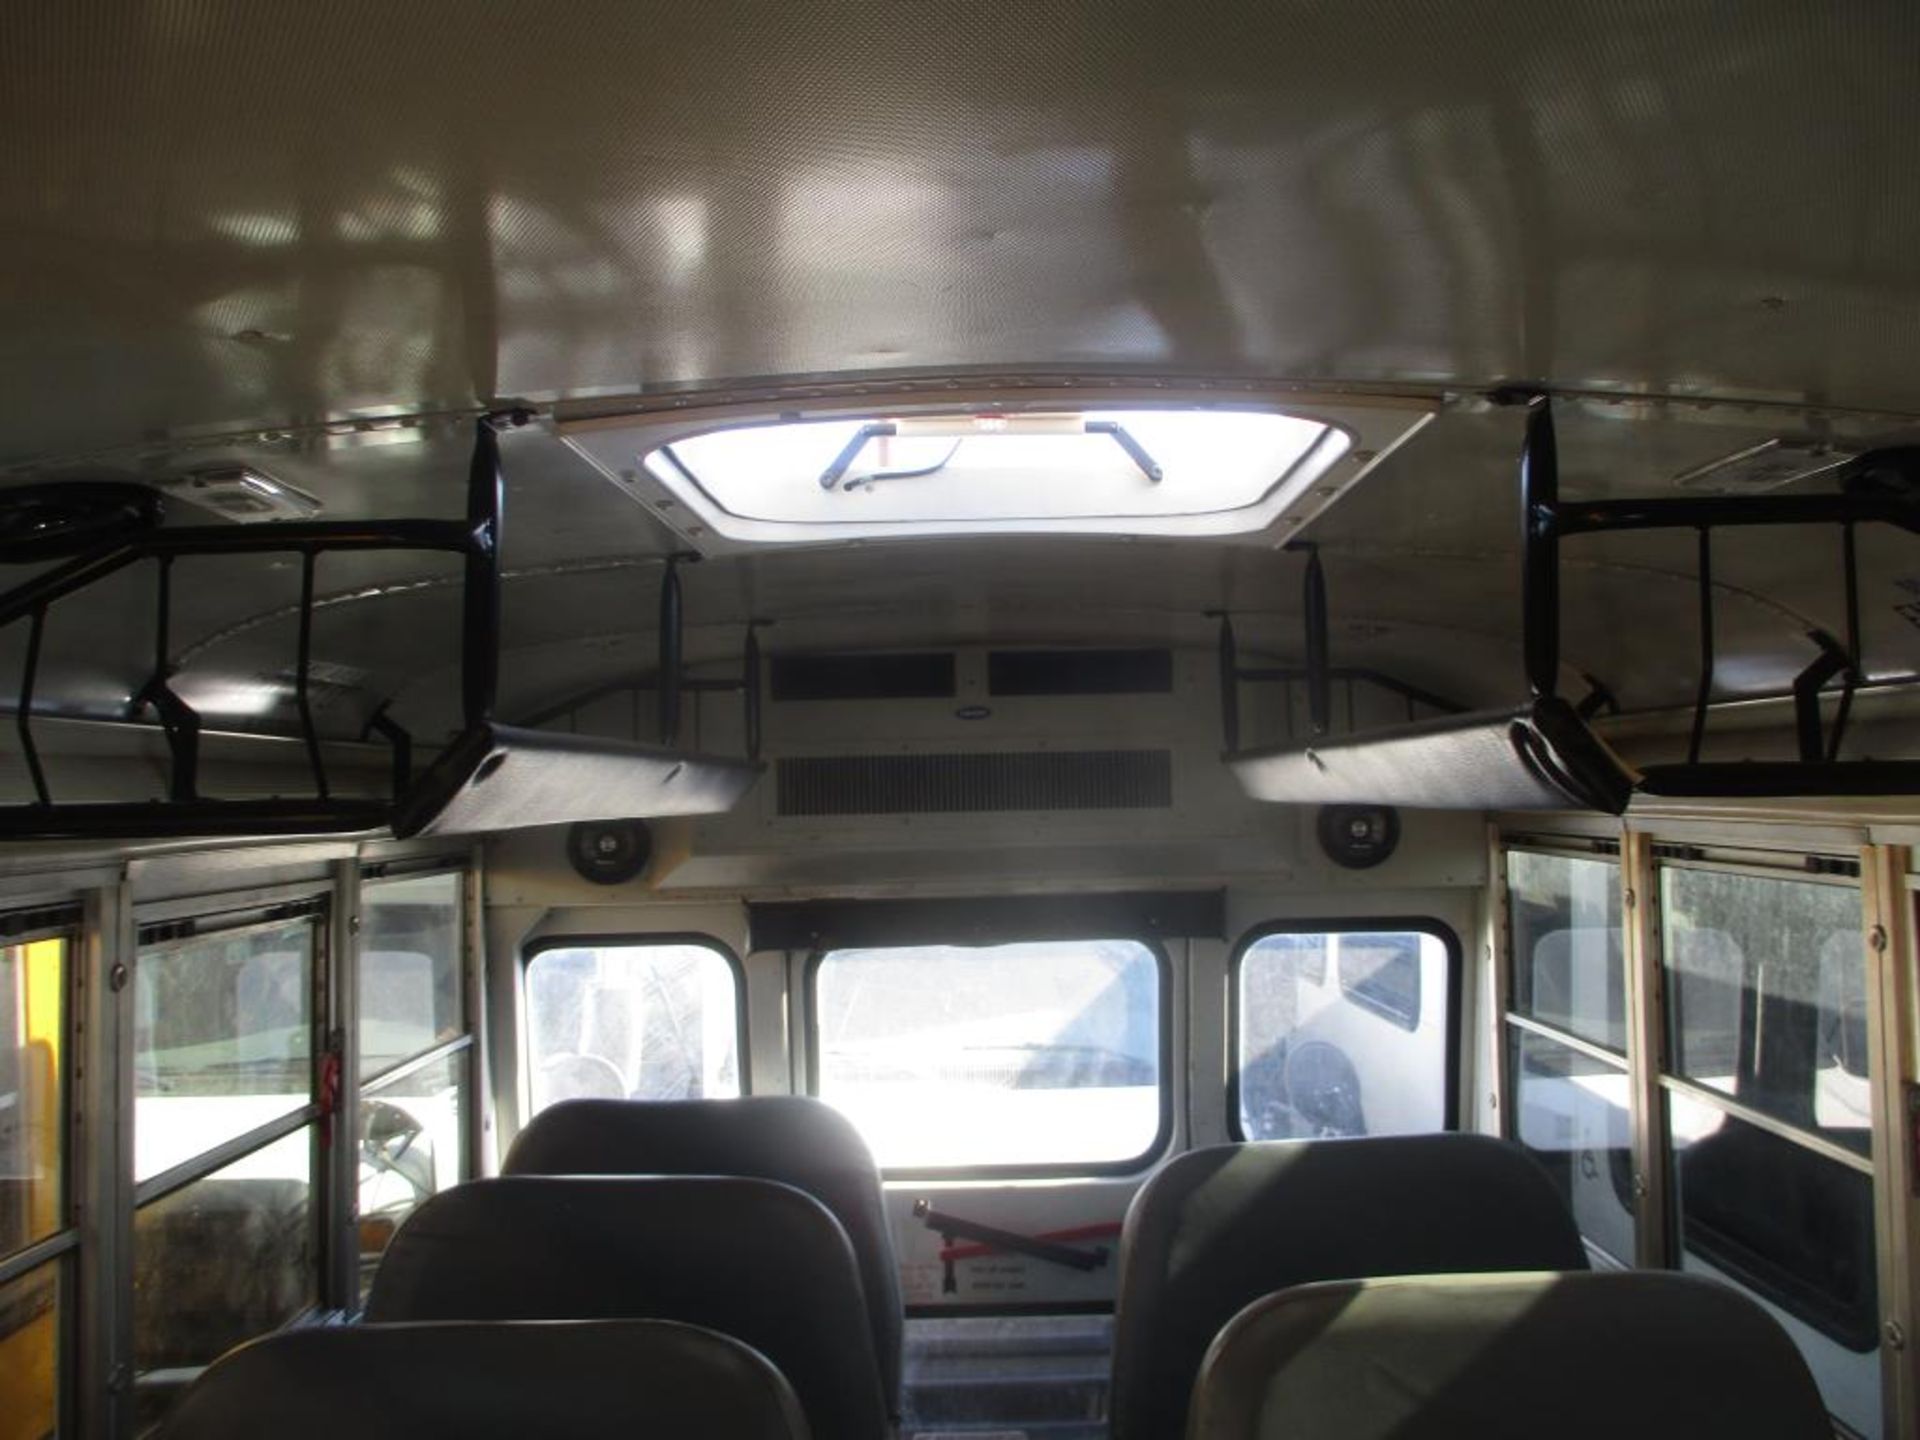 (Lot # 3922) - 2008 Ford E-Series School Bus - Image 8 of 11